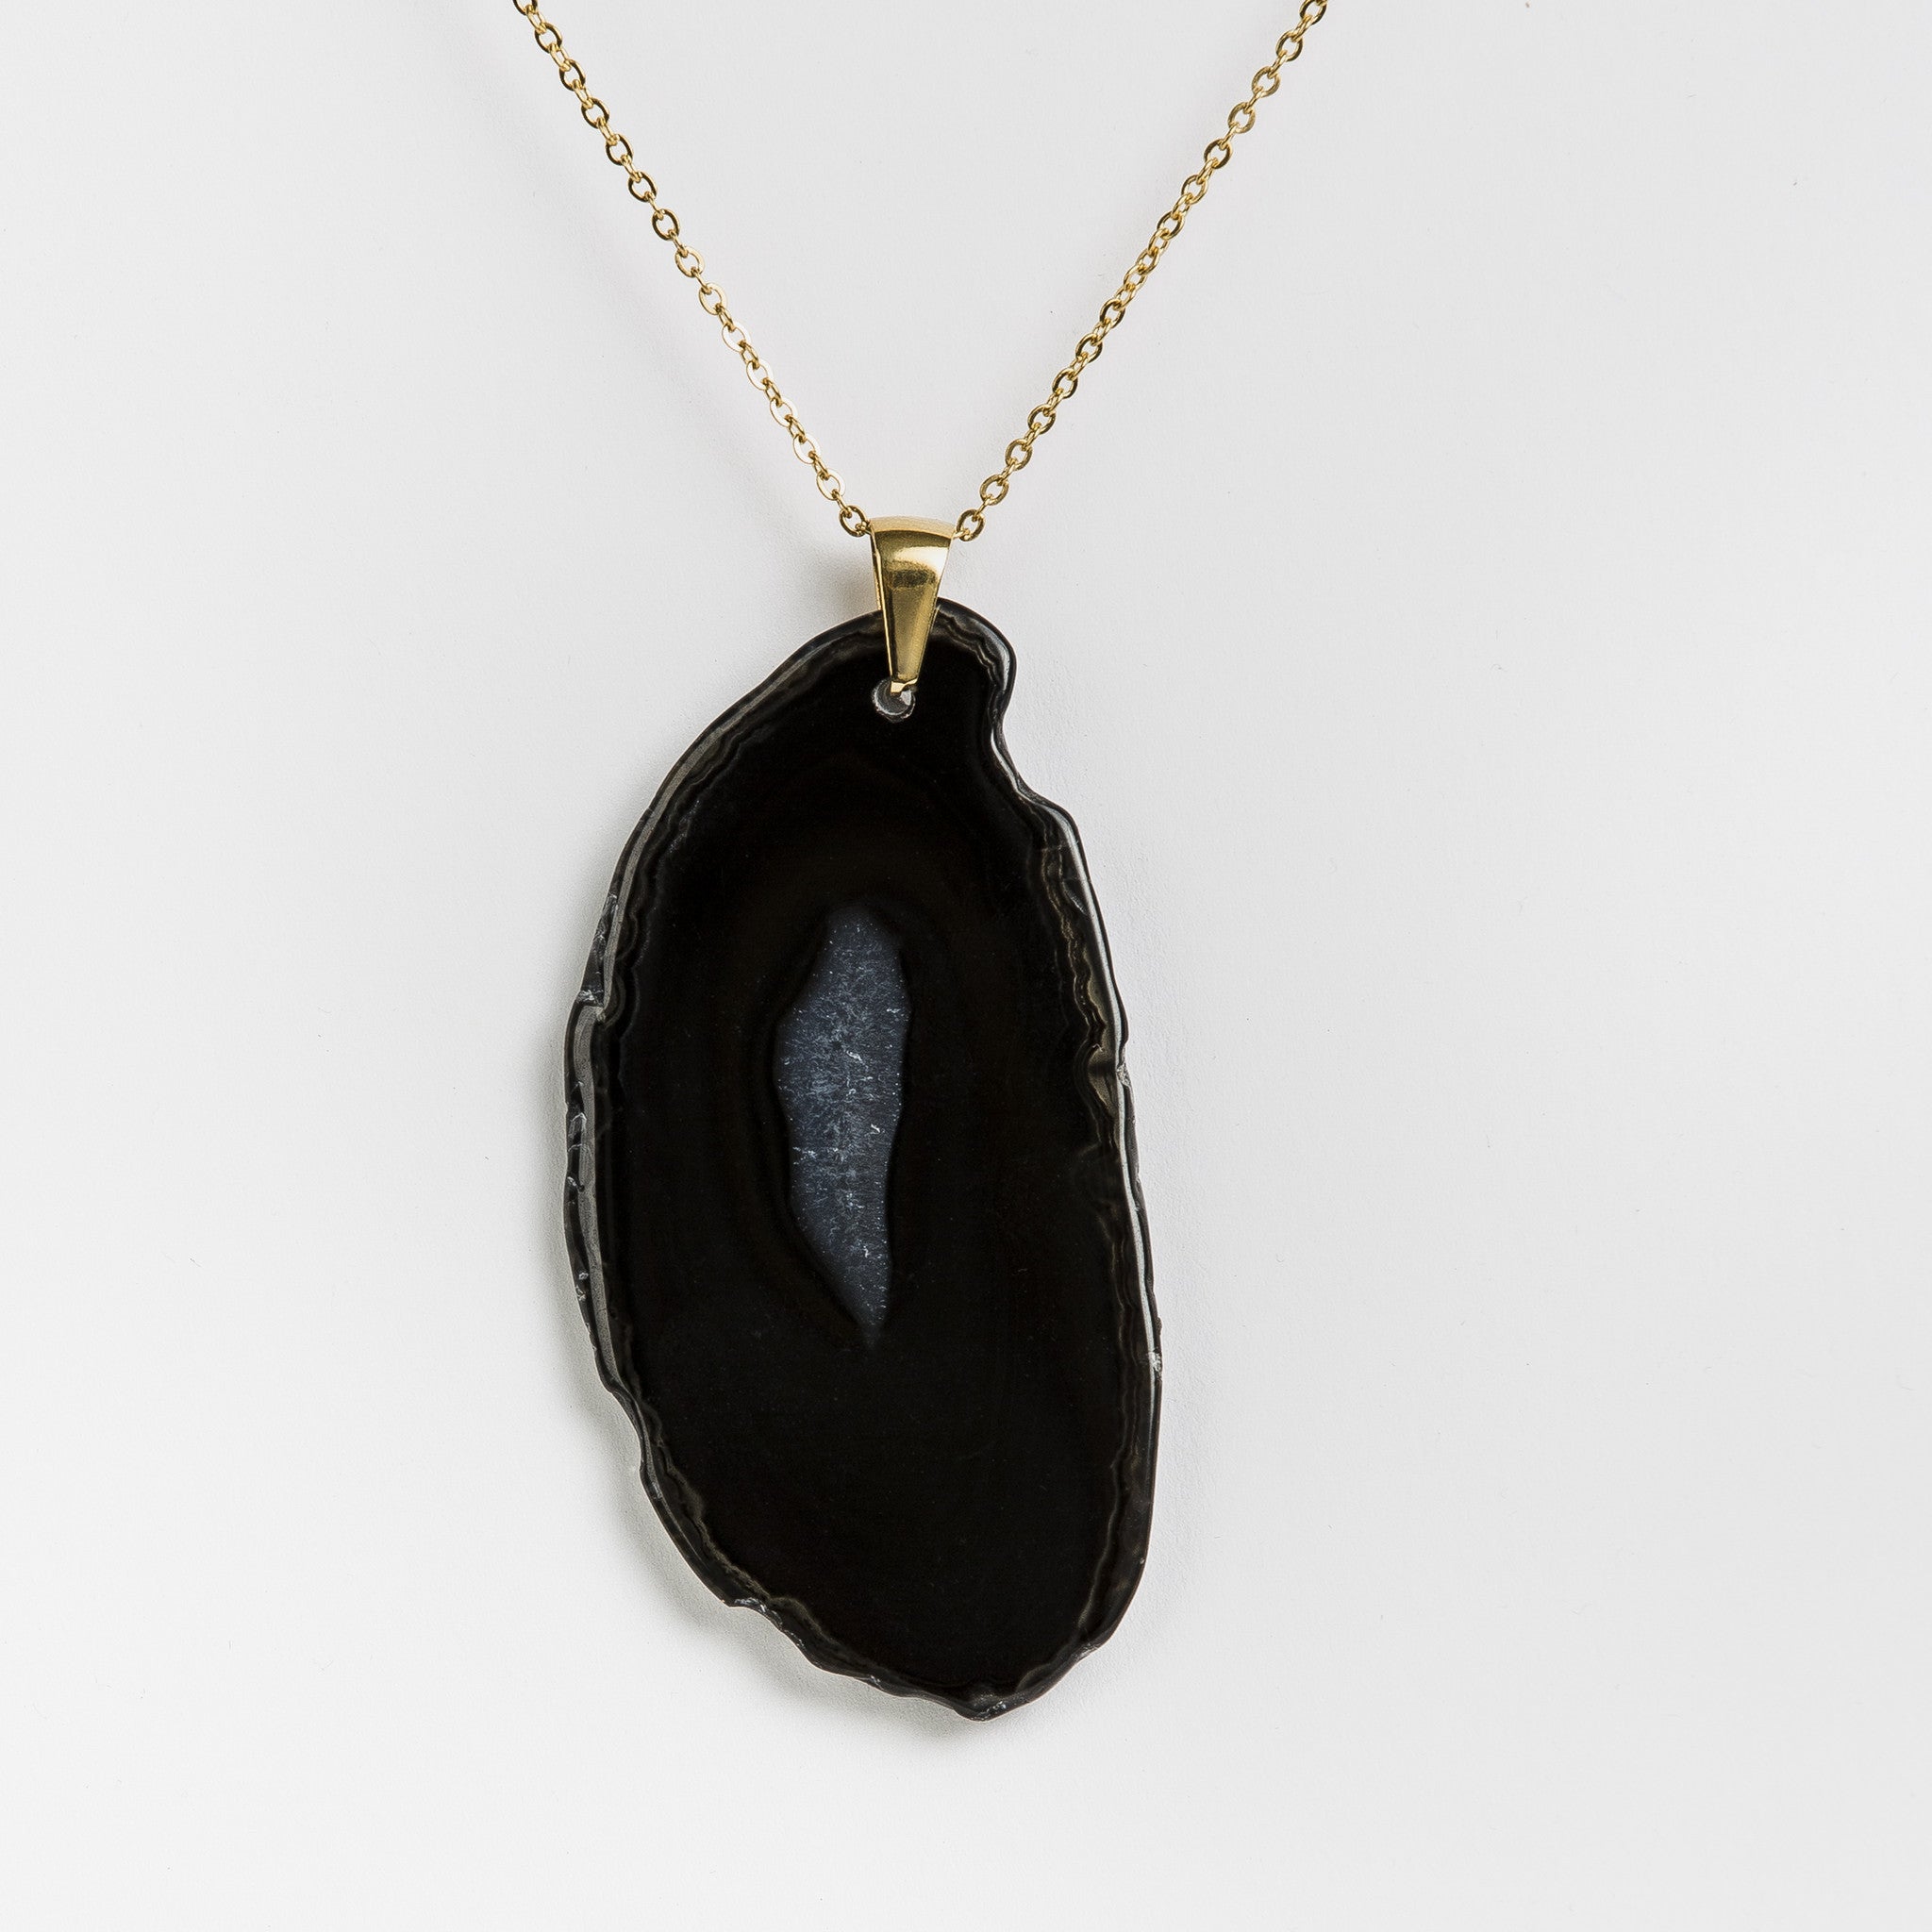 Necklace Agate Black Patterned Raw Edge